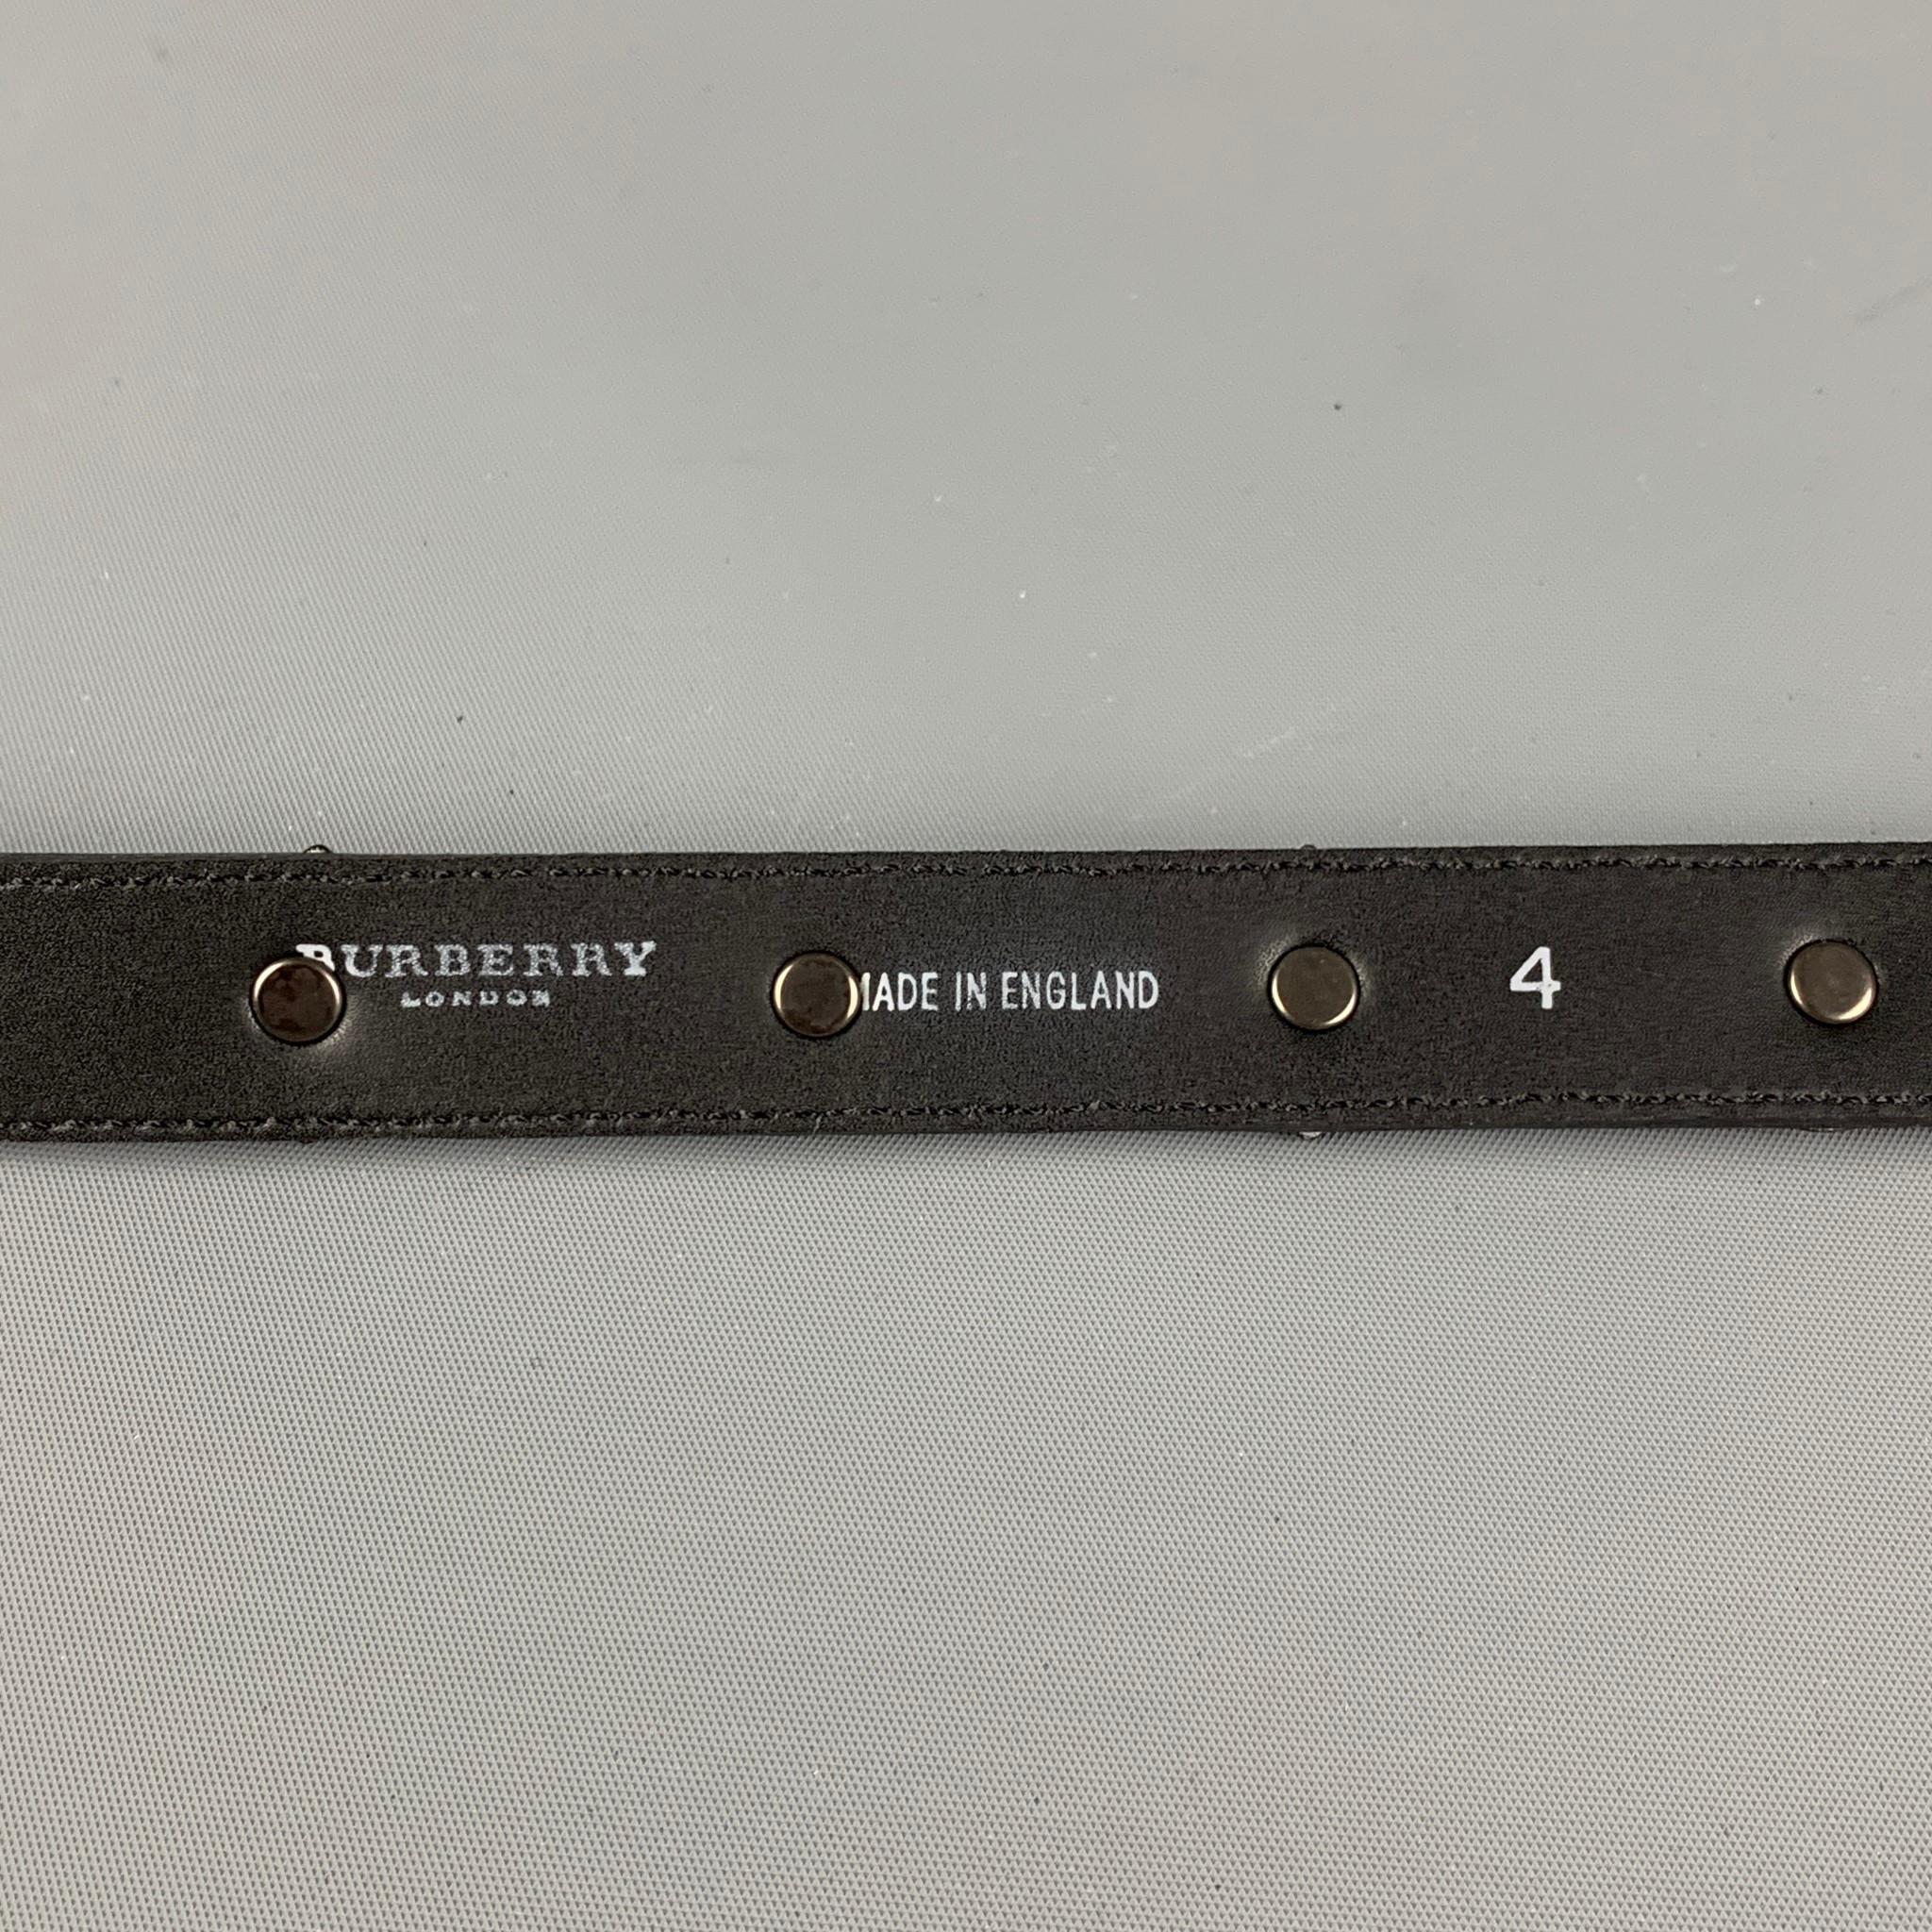 BURBERRY PRORSUM SS 08 'Warrior Collection' belt comes in a black leather featuring embellished details and a buckle closure. Made in England.

Very Good Pre-Owned Condition.
Marked: 4

Length: 36.5 in.
Width: 1 in.
Fits: 33.5 in. 35.5 in.
Buckle: 1